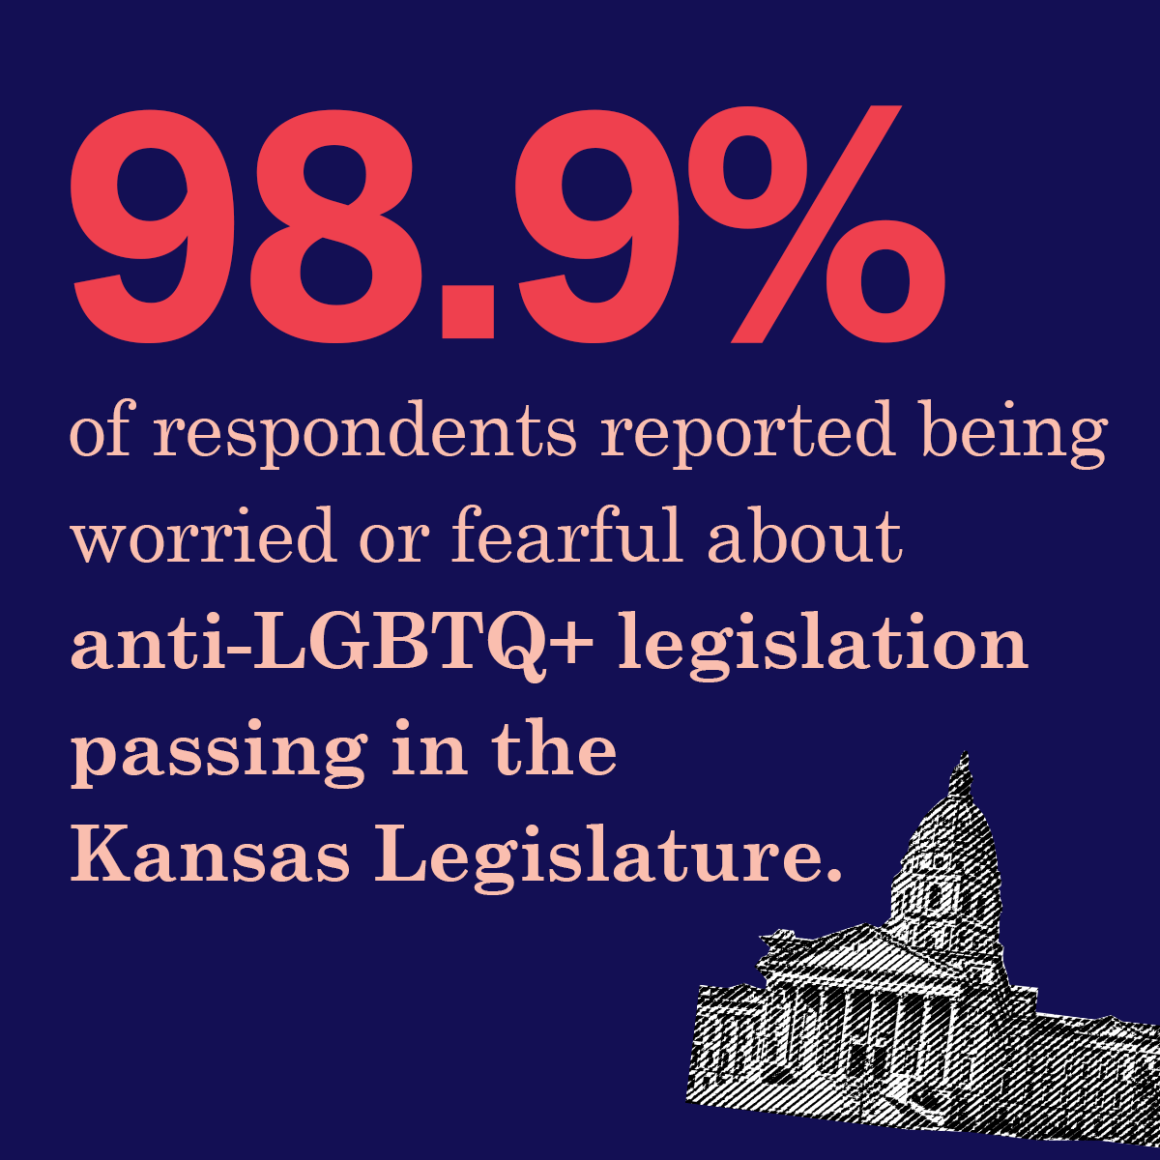 98.9% of respondents reported being worried or fearful about anti-LGBTQ+ legislation passing in the Kansas Legislature